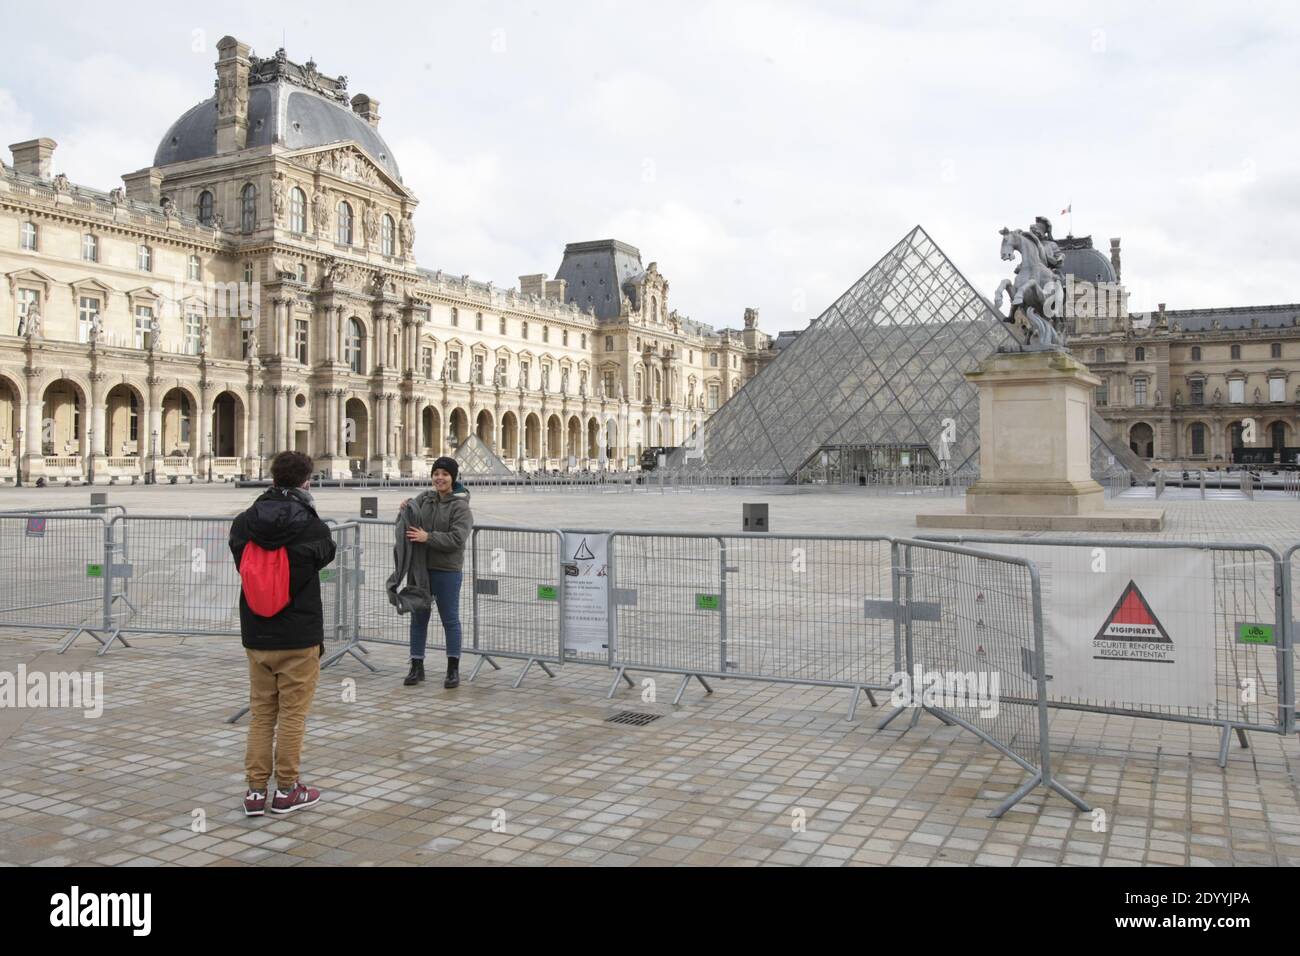 Paris, France. 28th Dec, 2020. A tourist pose for a photo at the deserted Napoleon courtyard near the closed Louvre museum amid the coronavirus pandemic on December 28, 2020 in Paris, France. According the latest report of the French National Authority for Health (HAS) 175 people died in hospital, and 8,822 new cases of Covid-19 infection, strict measures are still in place as curfew from 8:00 p.m. to 6:00 a.m. was put in place in all territory French. (Photo by Paulo Amorim/Sipa USA) Credit: Sipa USA/Alamy Live News Stock Photo